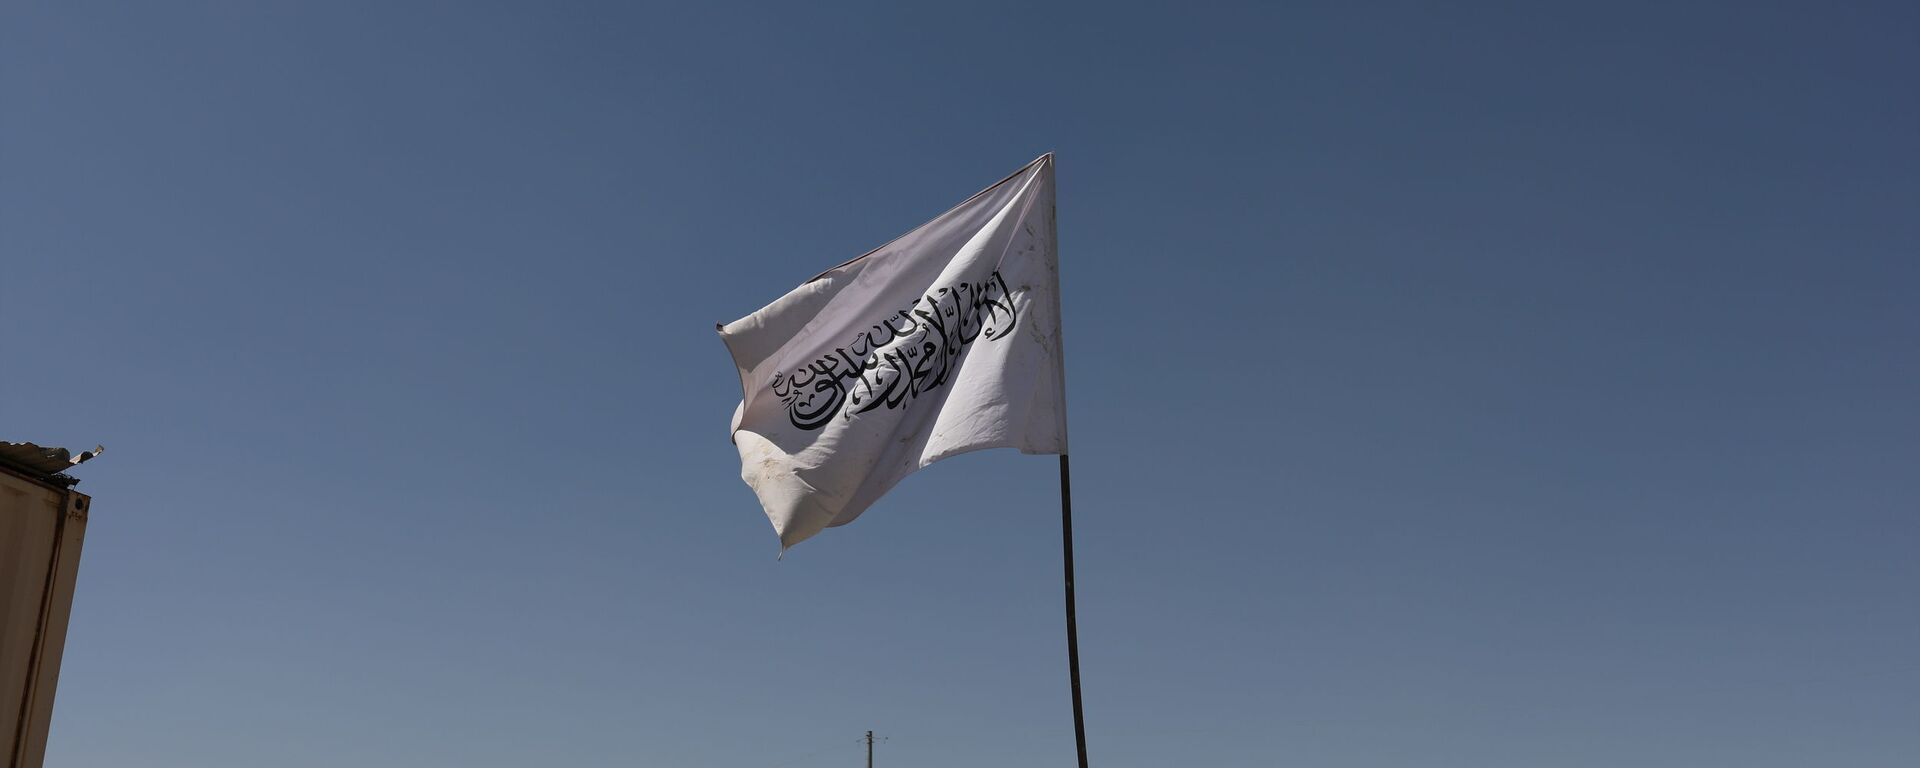 The flag of the Islamic Emirate of Afghanistan (Taliban) is raised at the military airfield in Kabul, Afghanistan, September 5, 2021. - Sputnik International, 1920